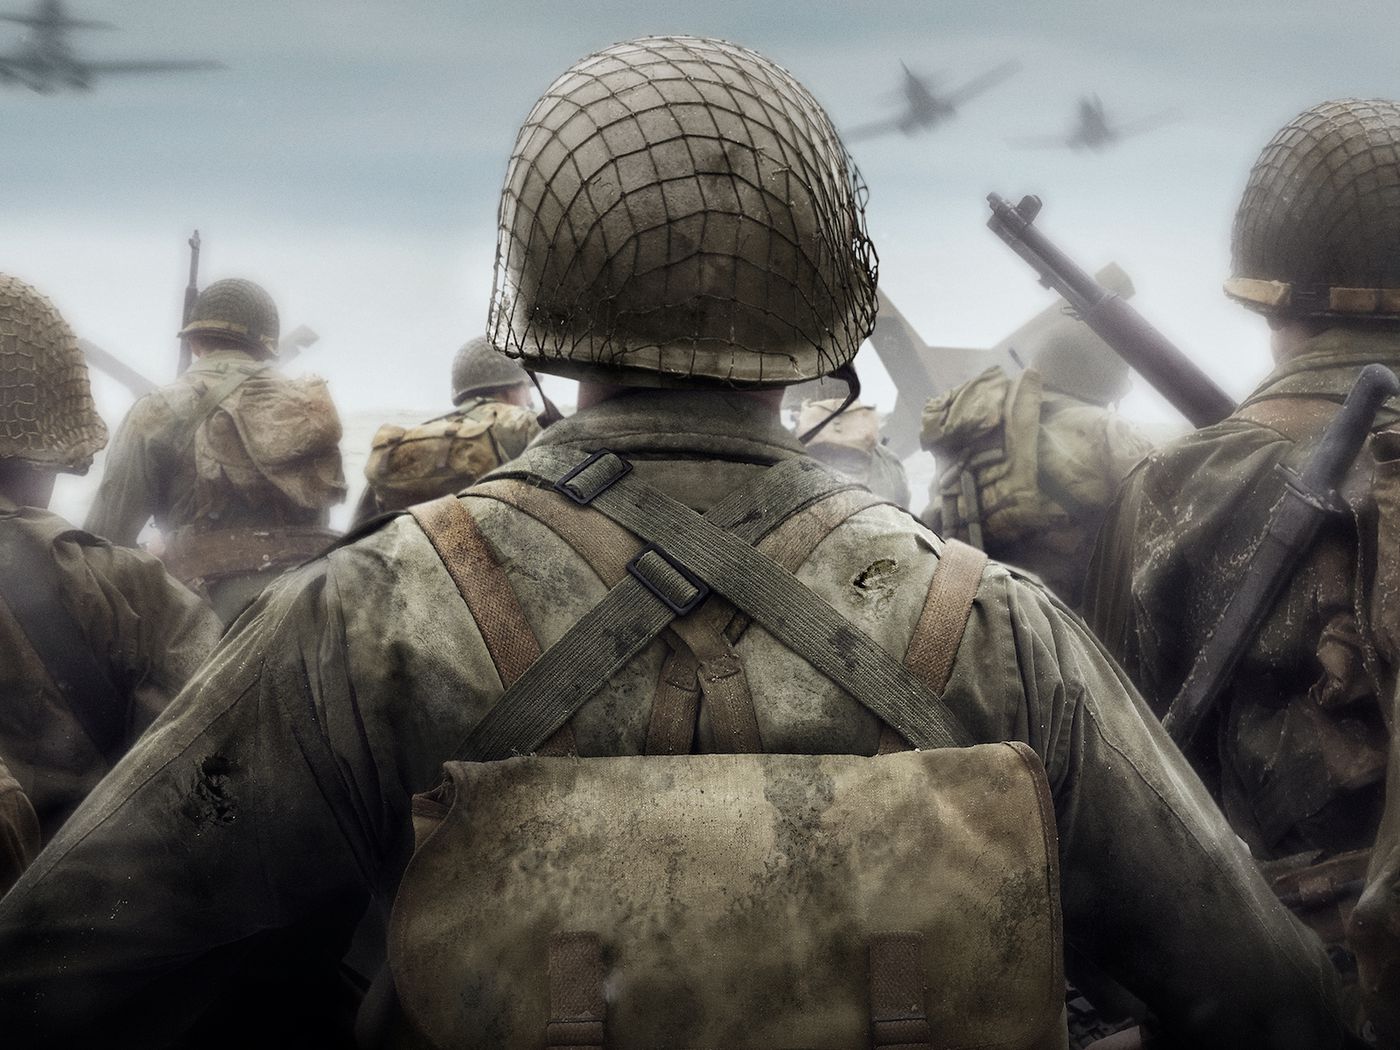 Call of Duty 2021 is called Vanguard, set in WWII, according to leak